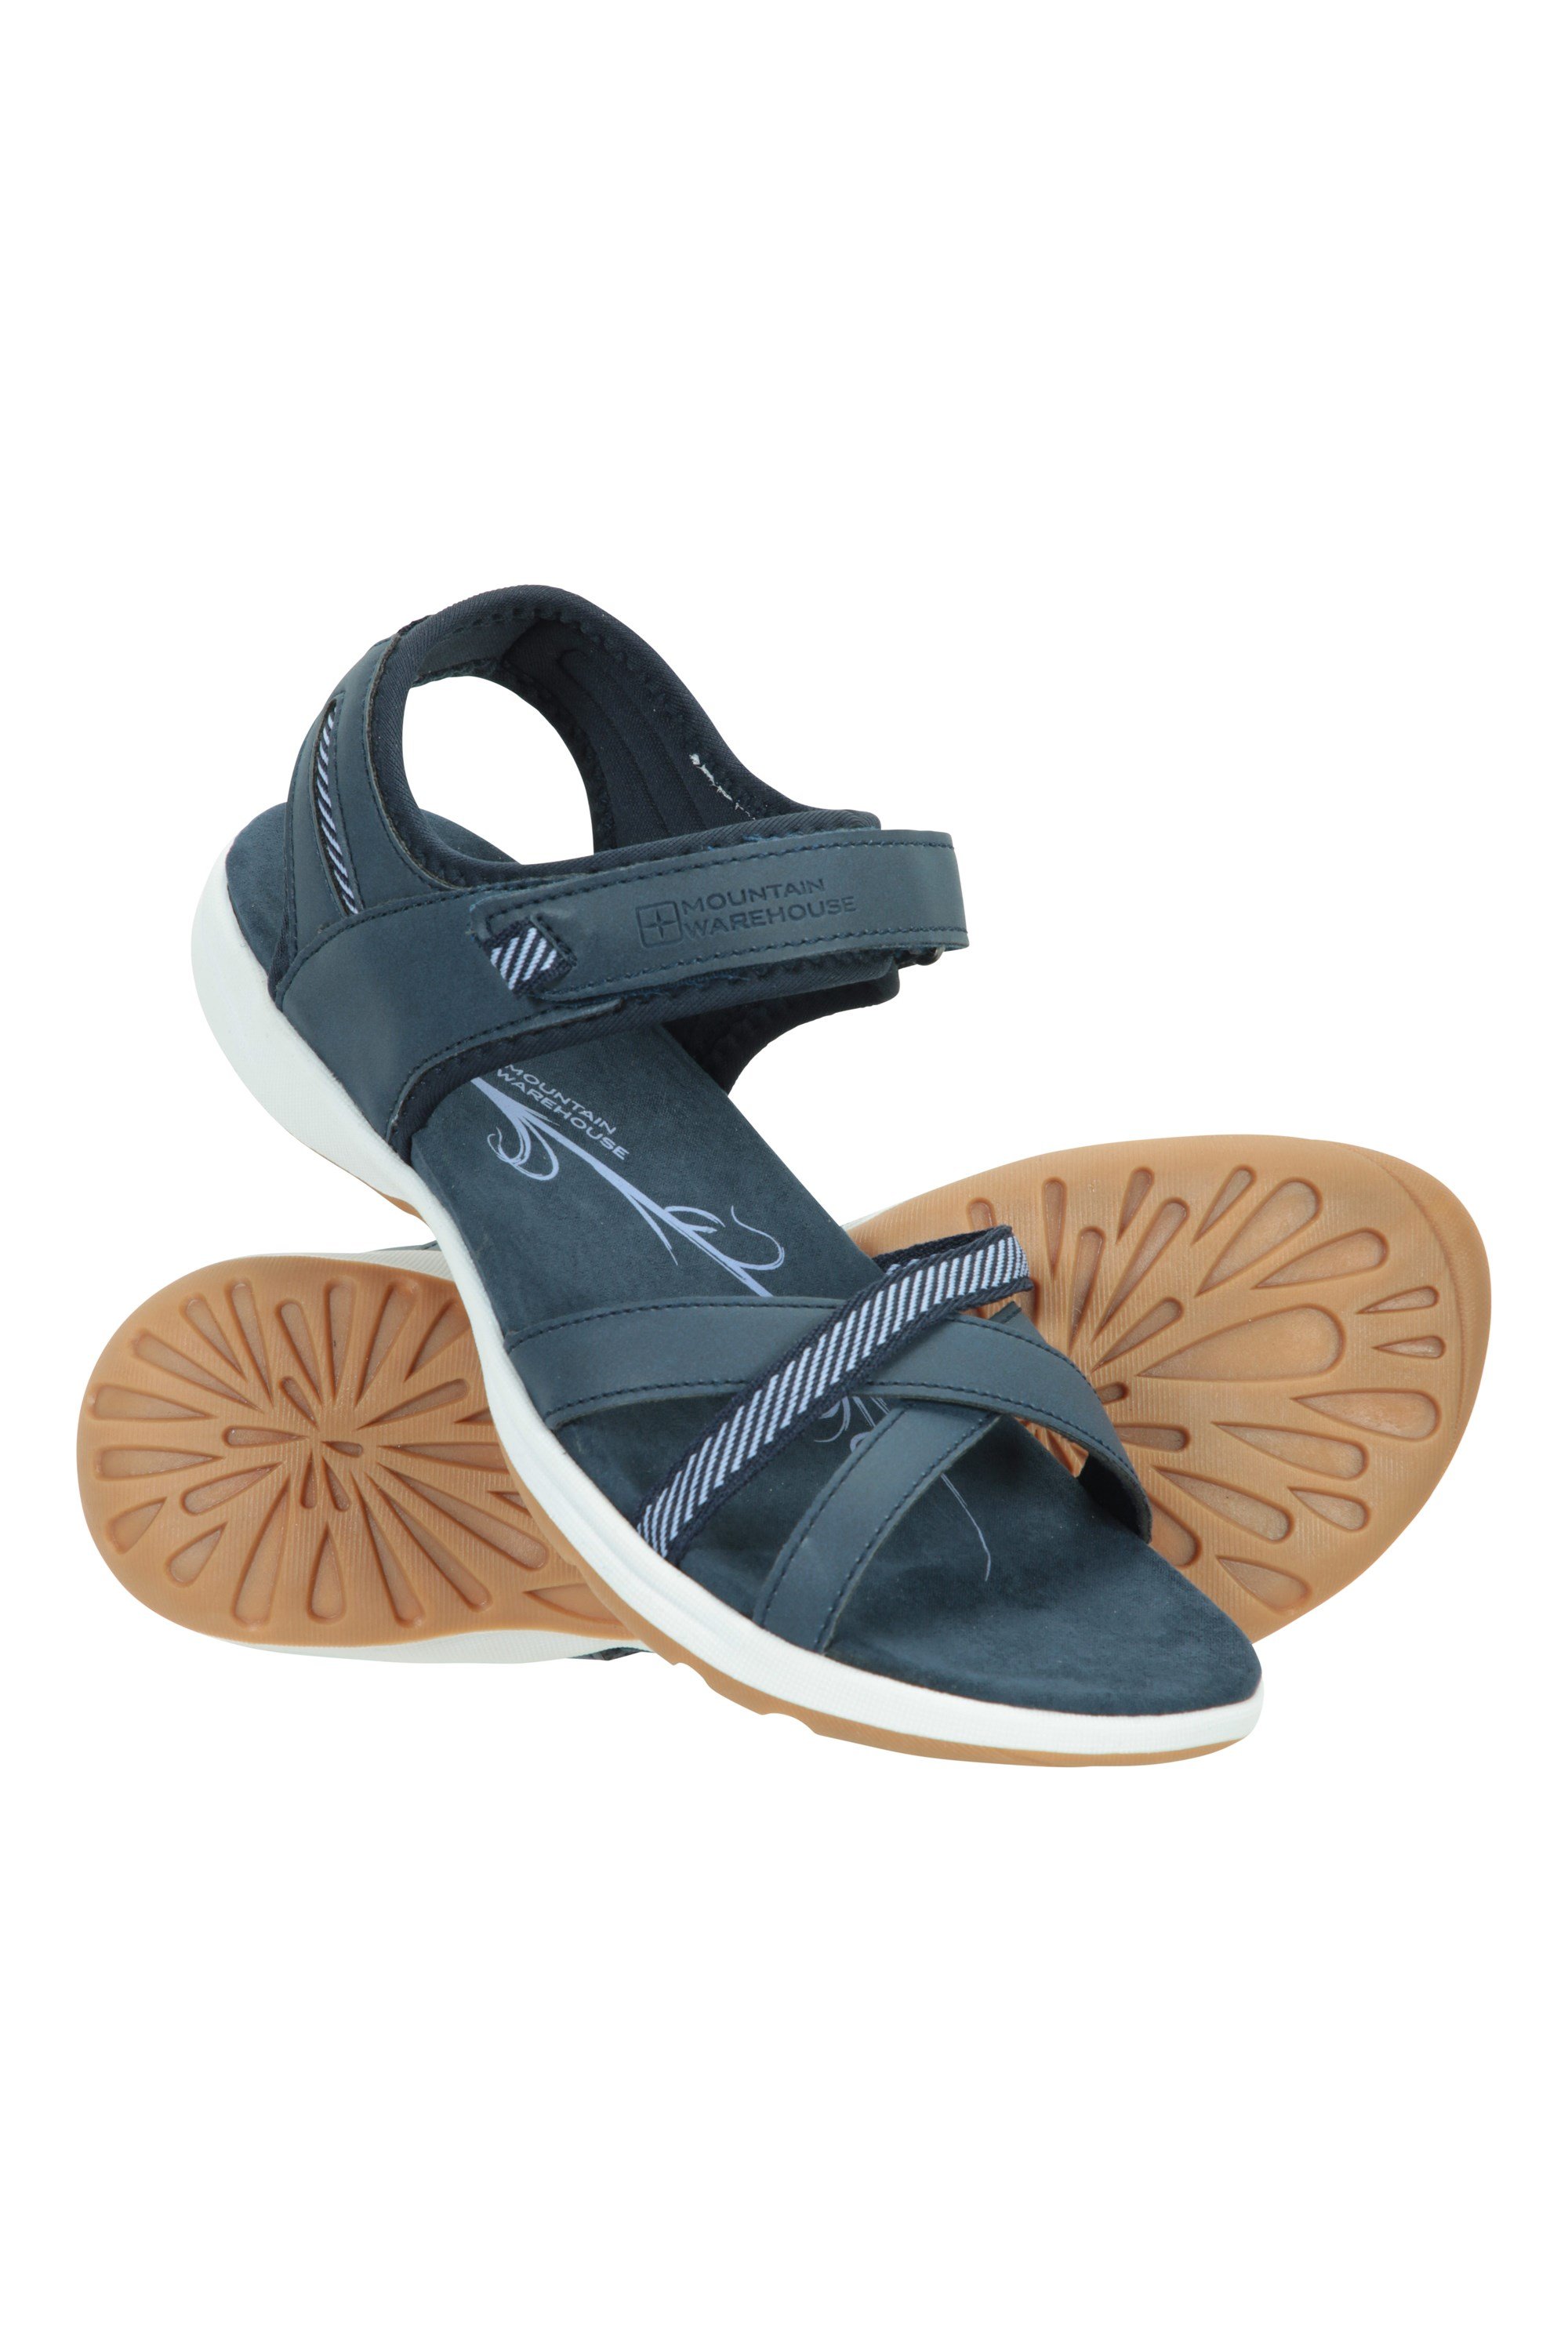 Casual Summer Shoes by The Pool at Home Great for in The Garden Mountain Warehouse Womens Sliders- Comfy Modern Slip On Ladies Sandals On The Beach & Holidays 